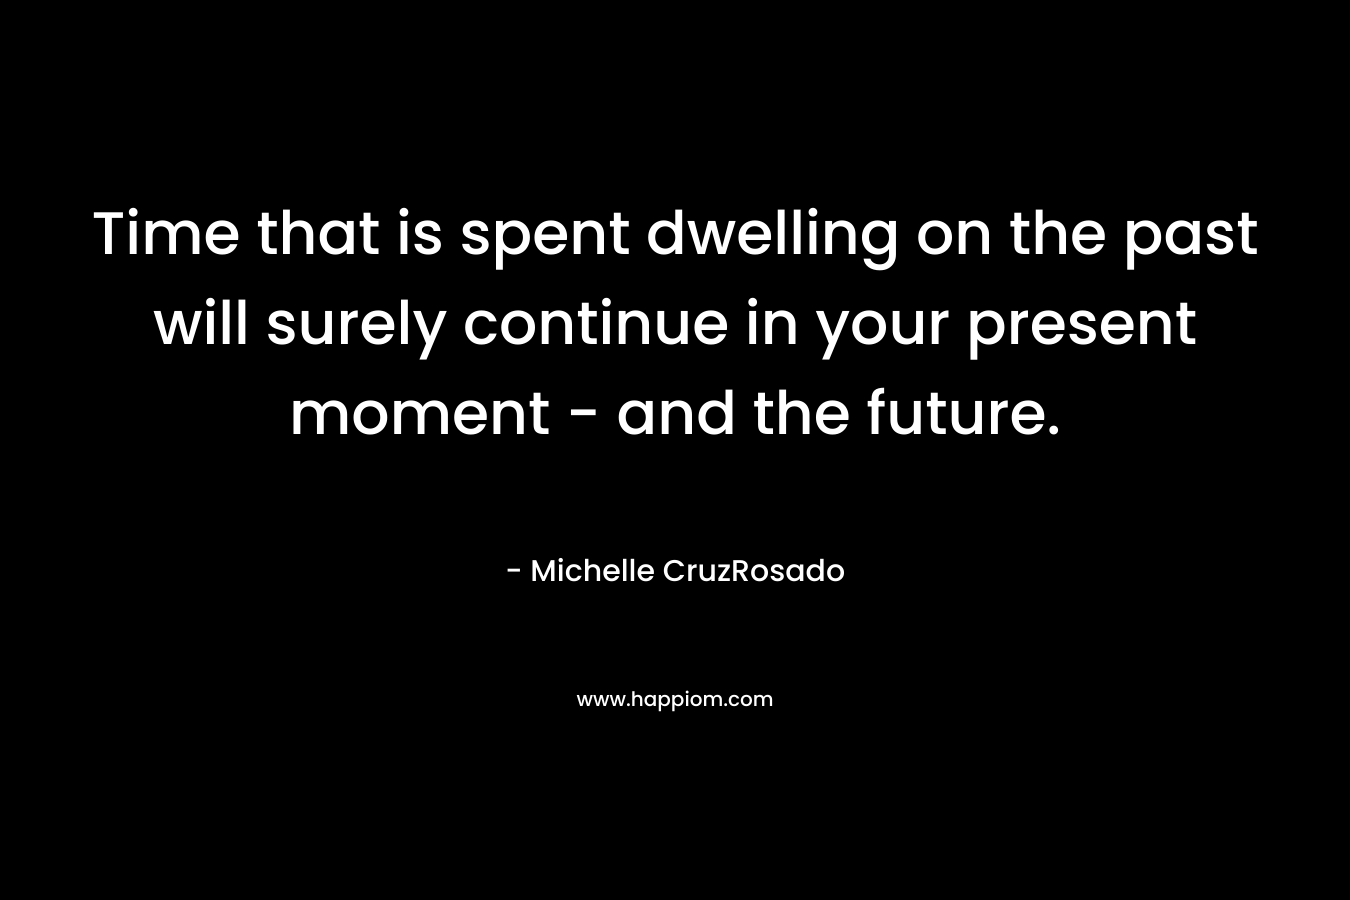 Time that is spent dwelling on the past will surely continue in your present moment – and the future. – Michelle CruzRosado